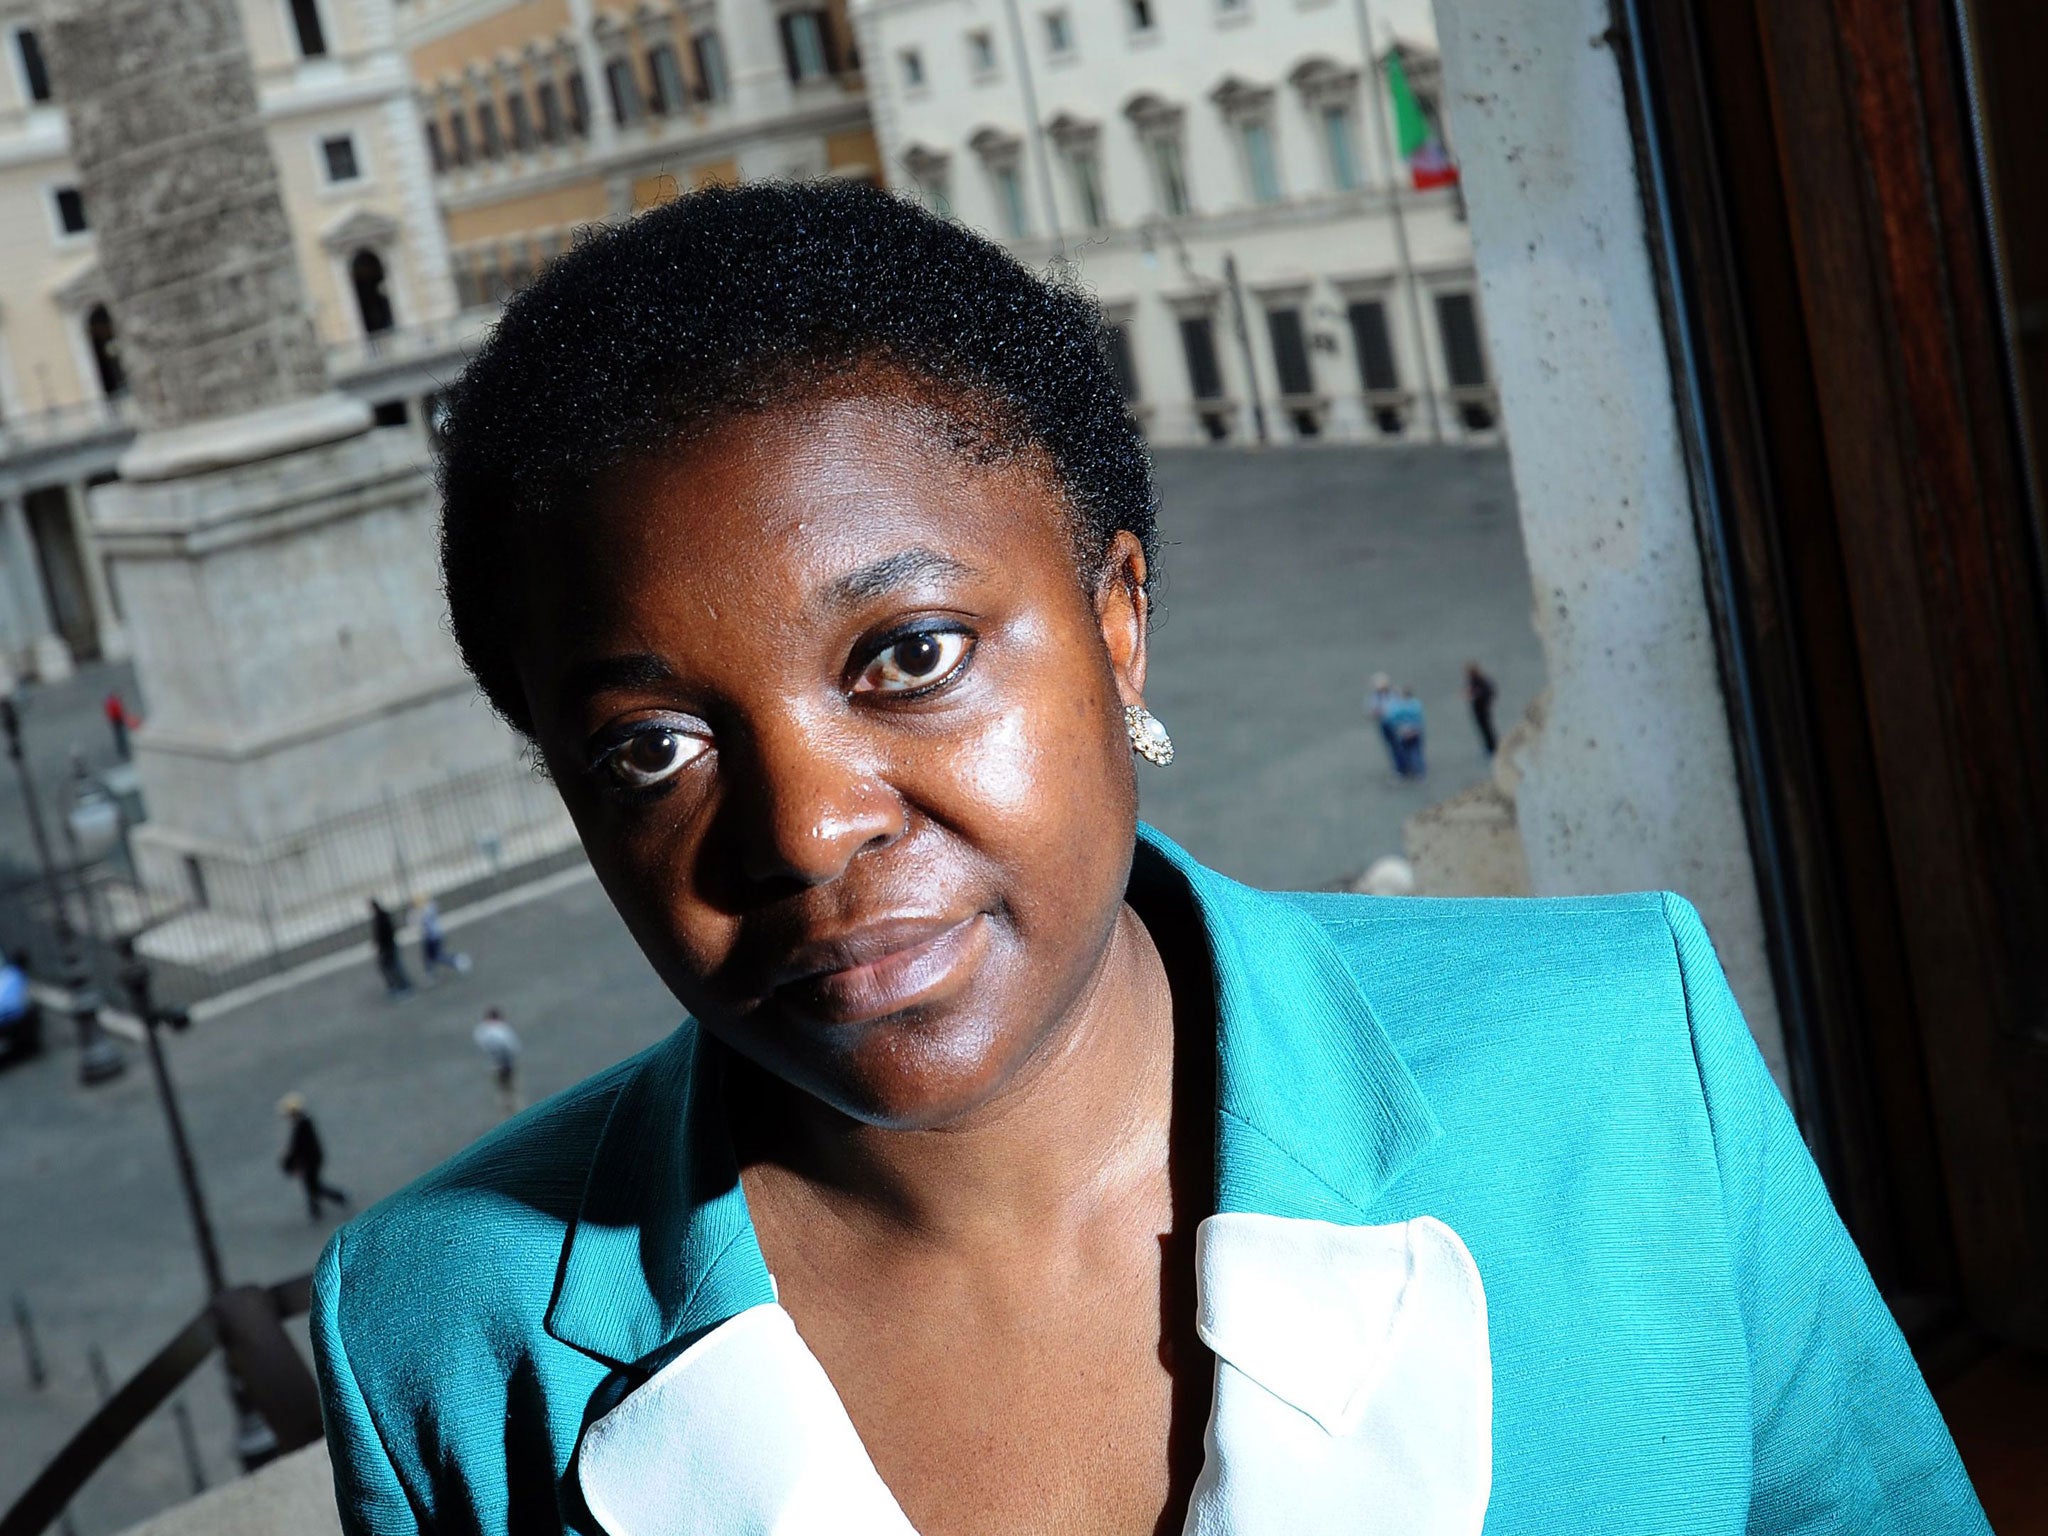 Cecile Kyenge, Italy’s first black minister, has faced prejudice